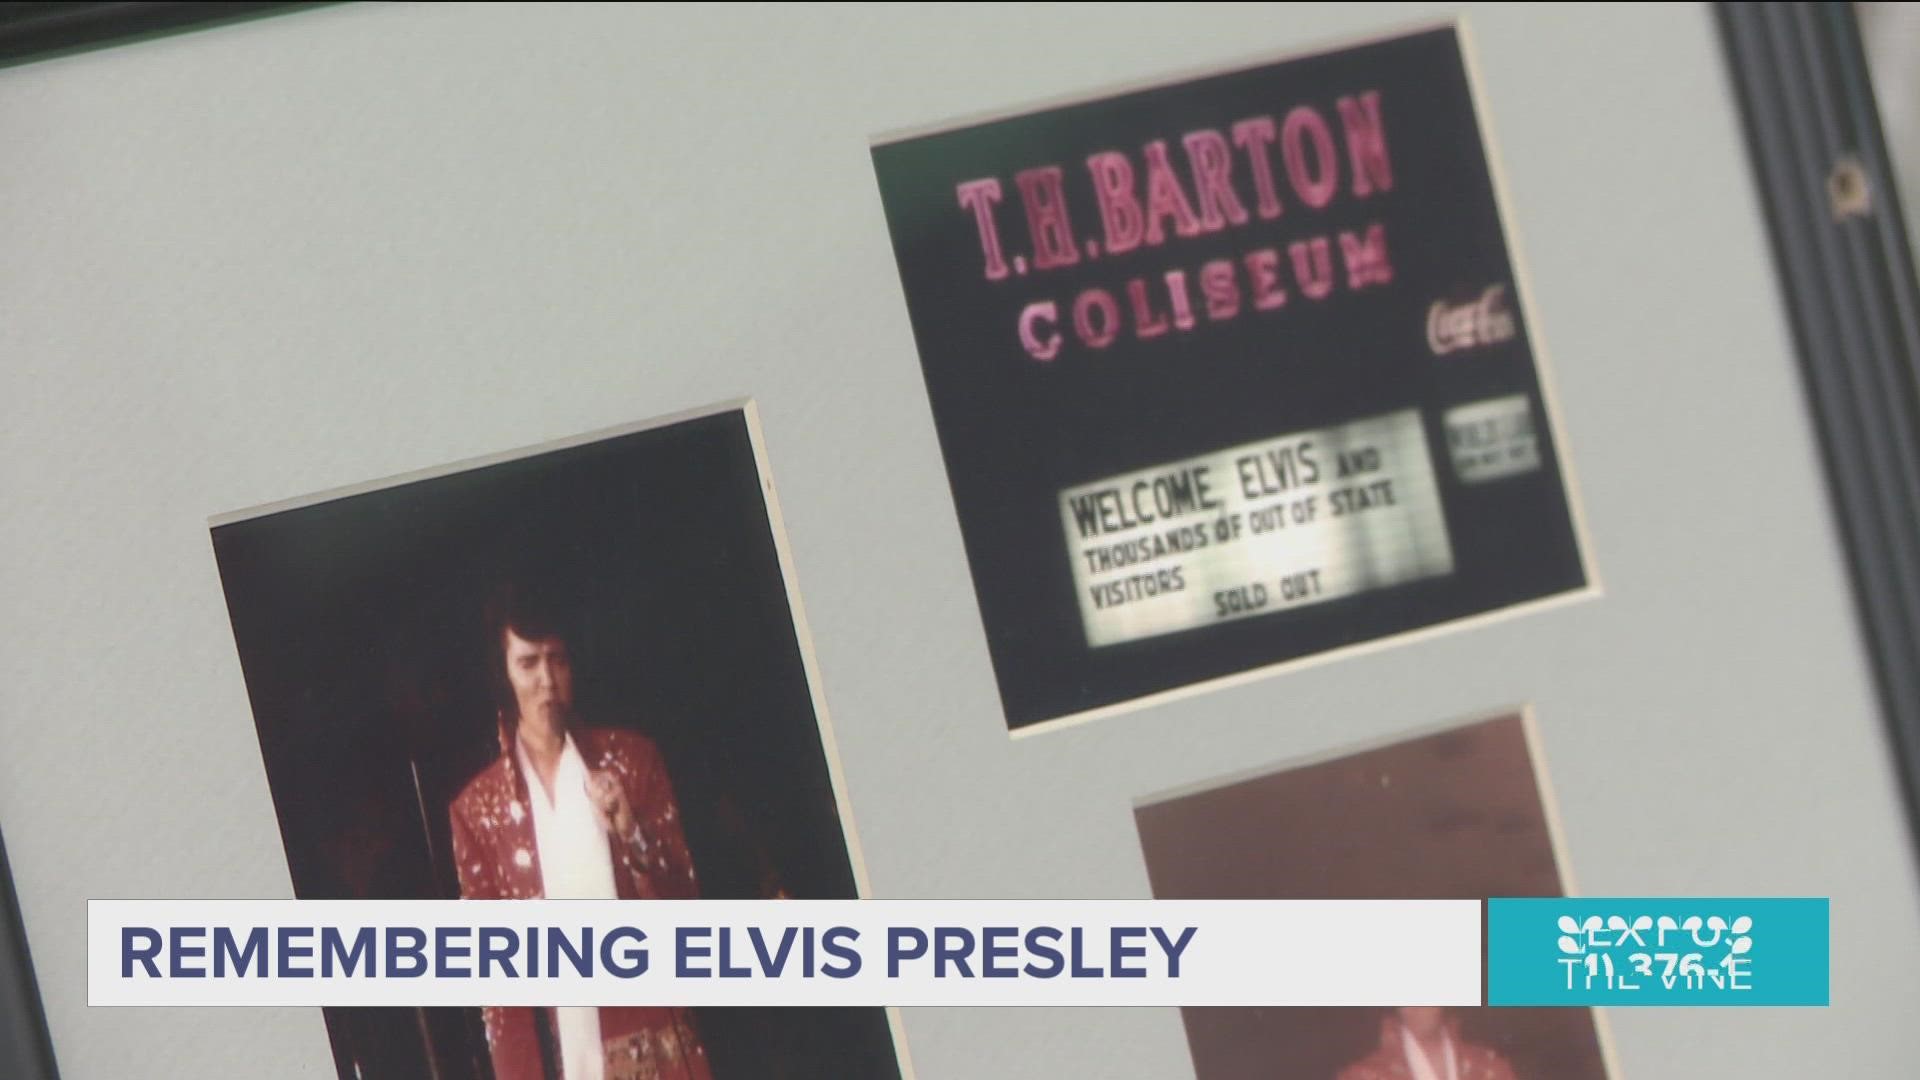 Elvis performed at Barton Collesium on April 17, 1972